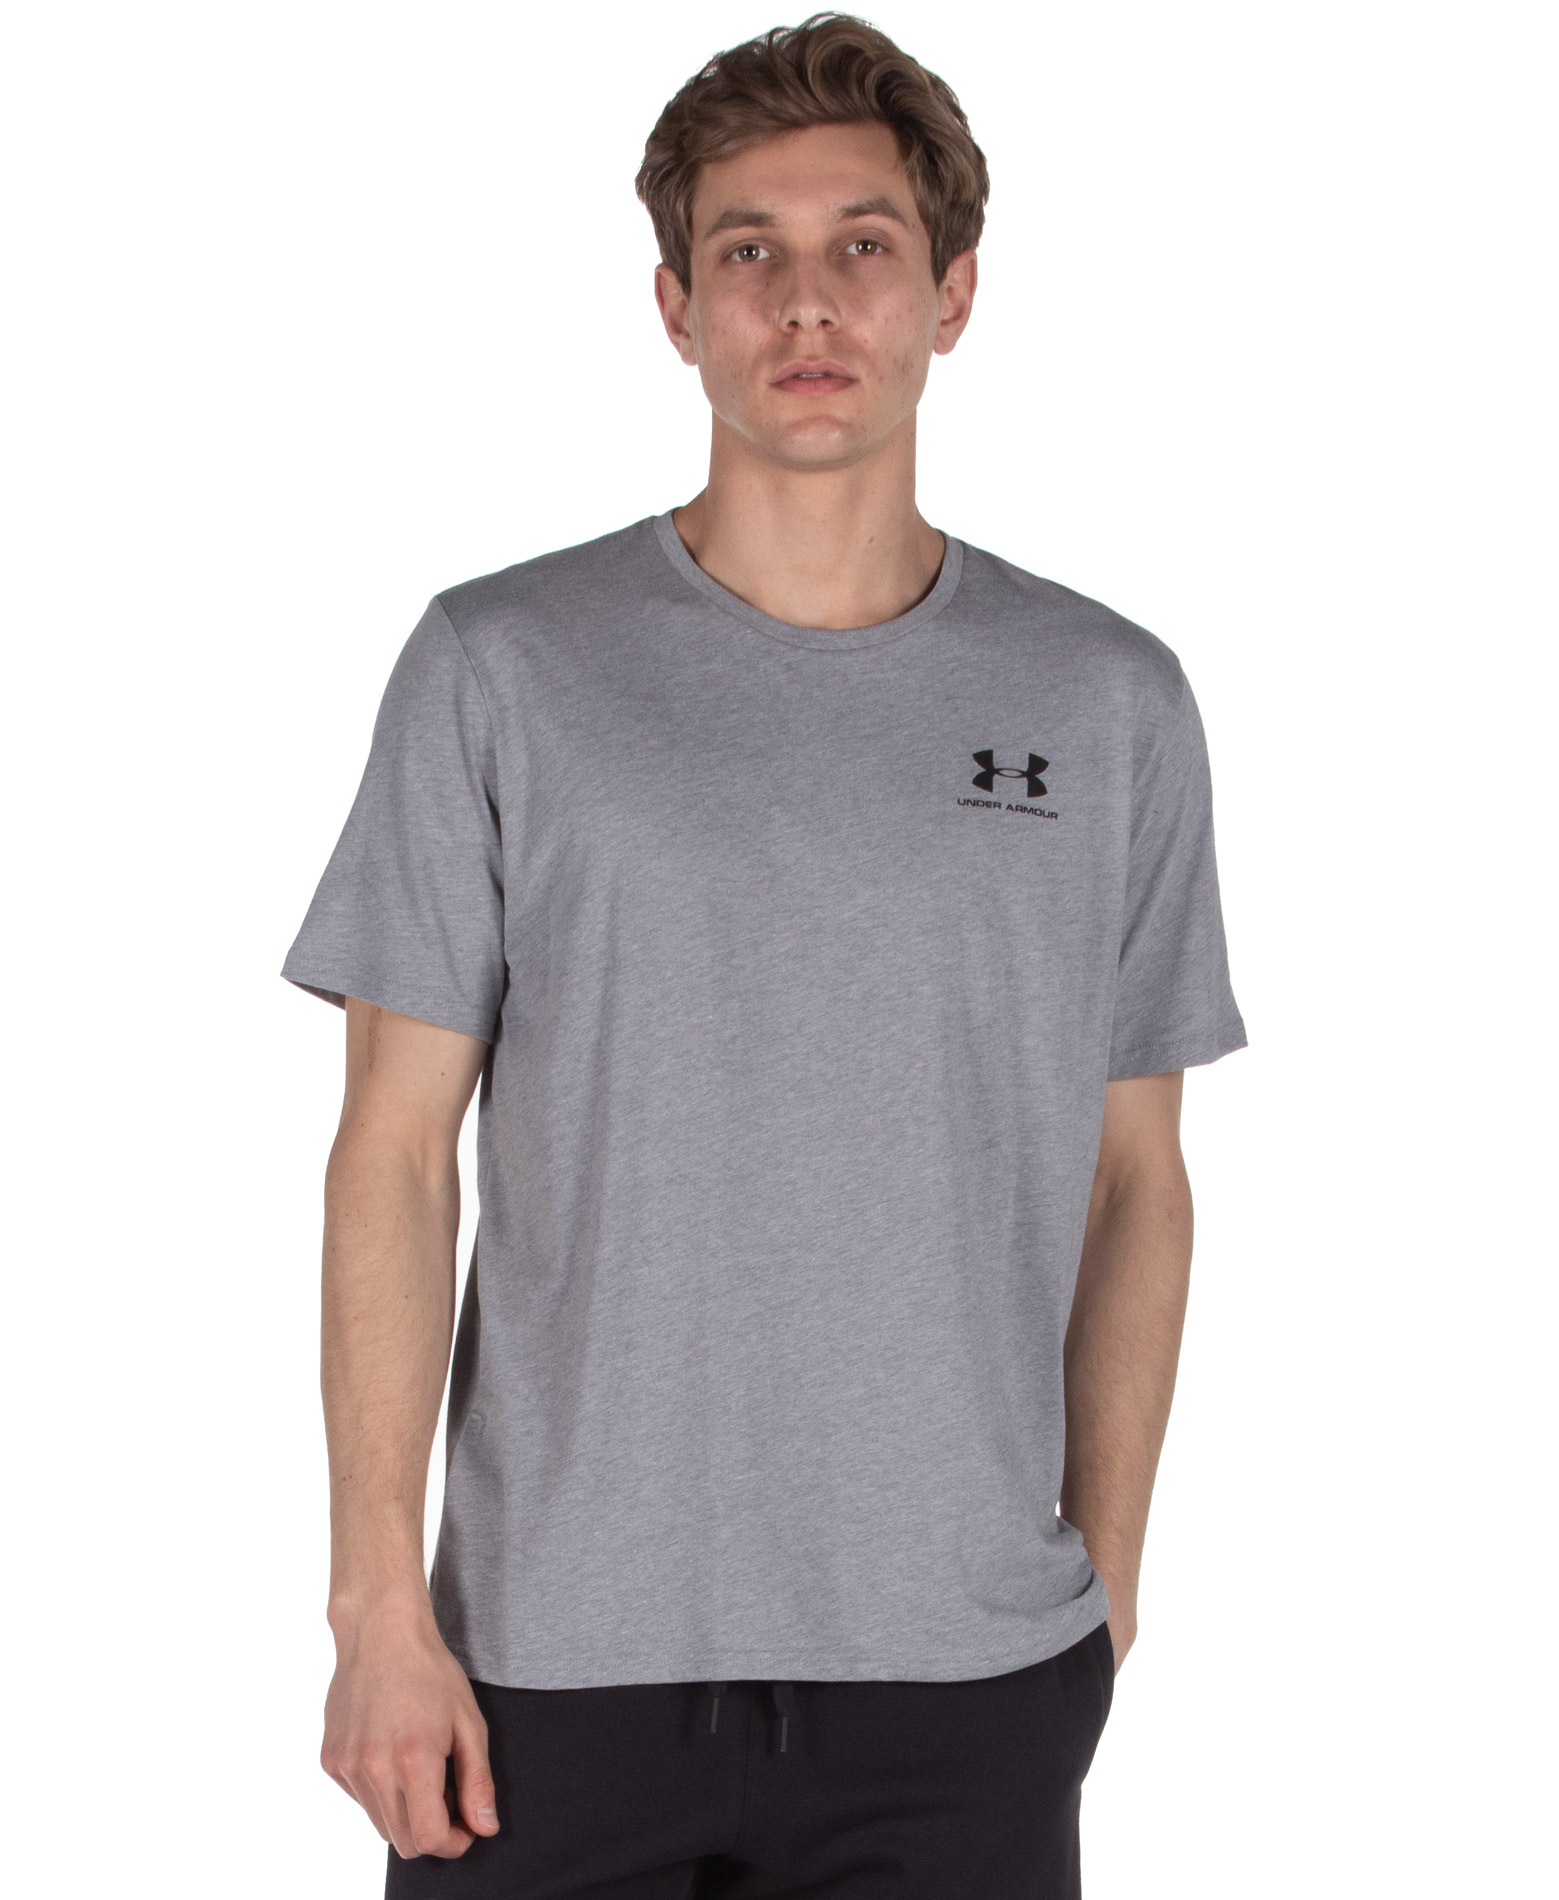 UNDER ARMOUR SPORTSTYLE LEFT CHEST SS 1326799-036 Γκρί